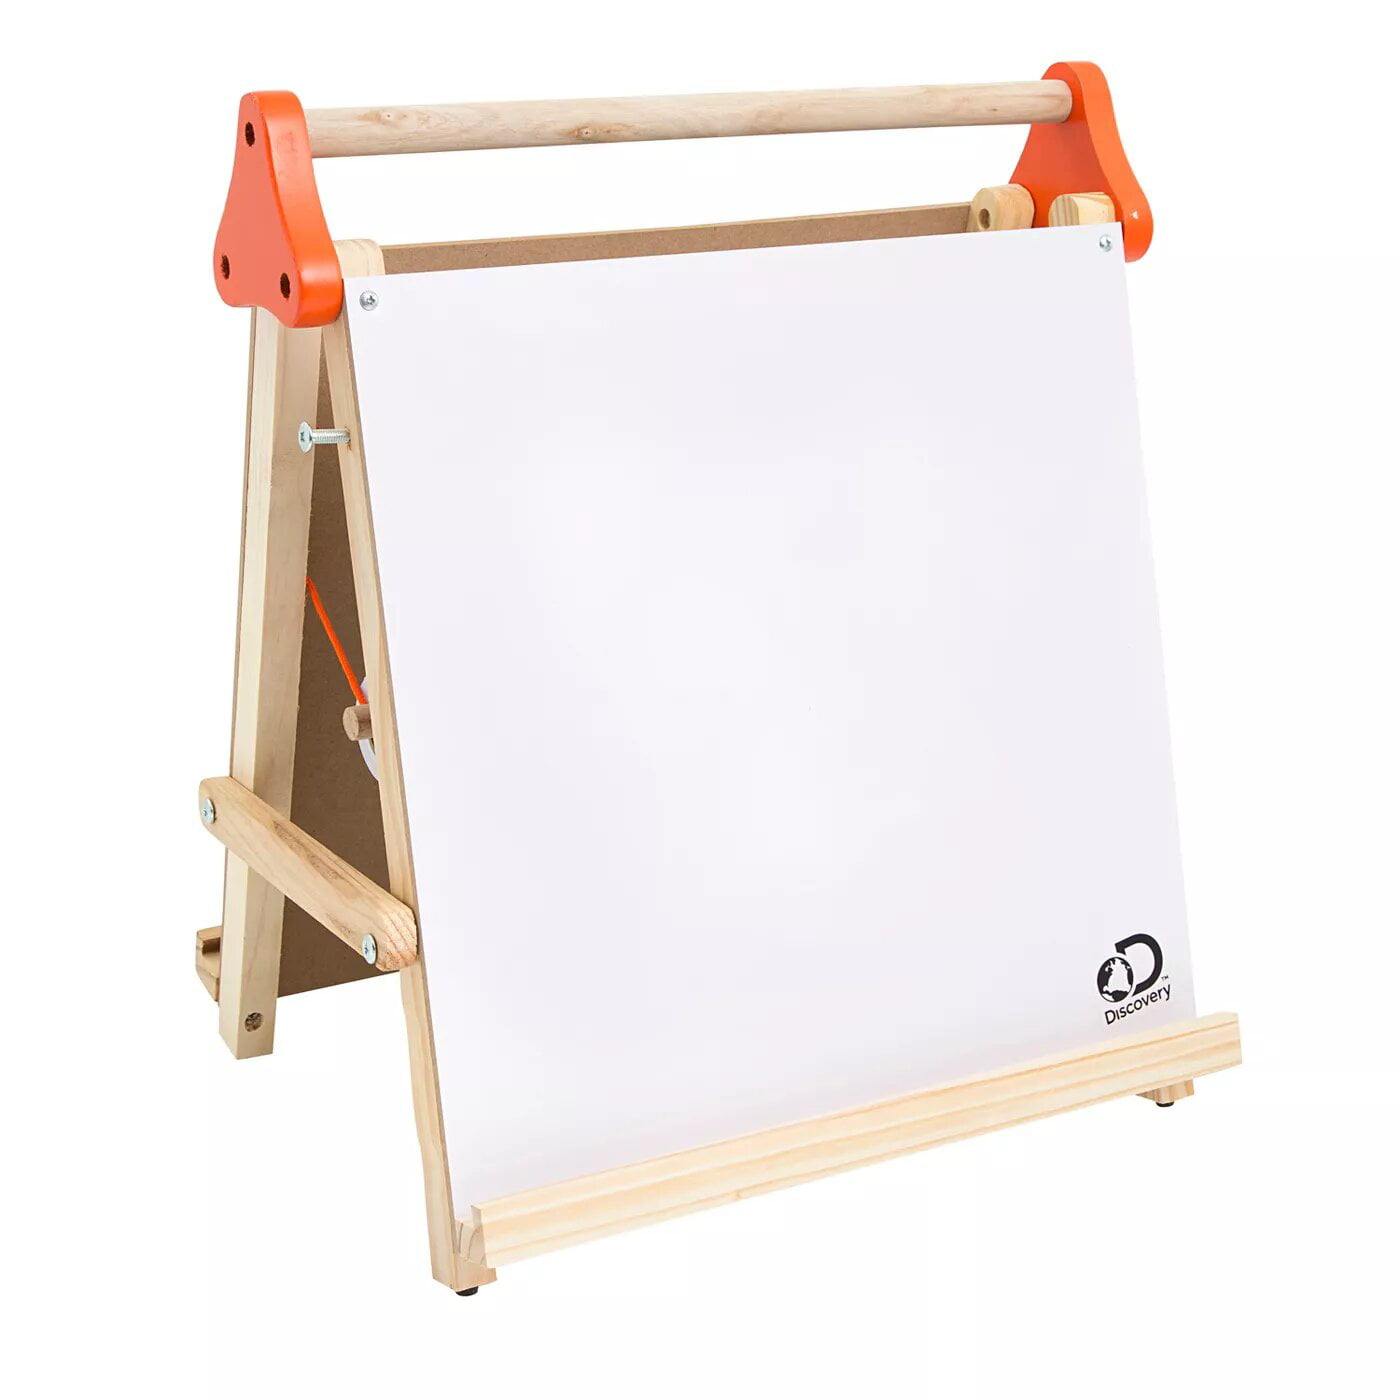 Discovery Kids STEM Tabletop Easel - Macy's